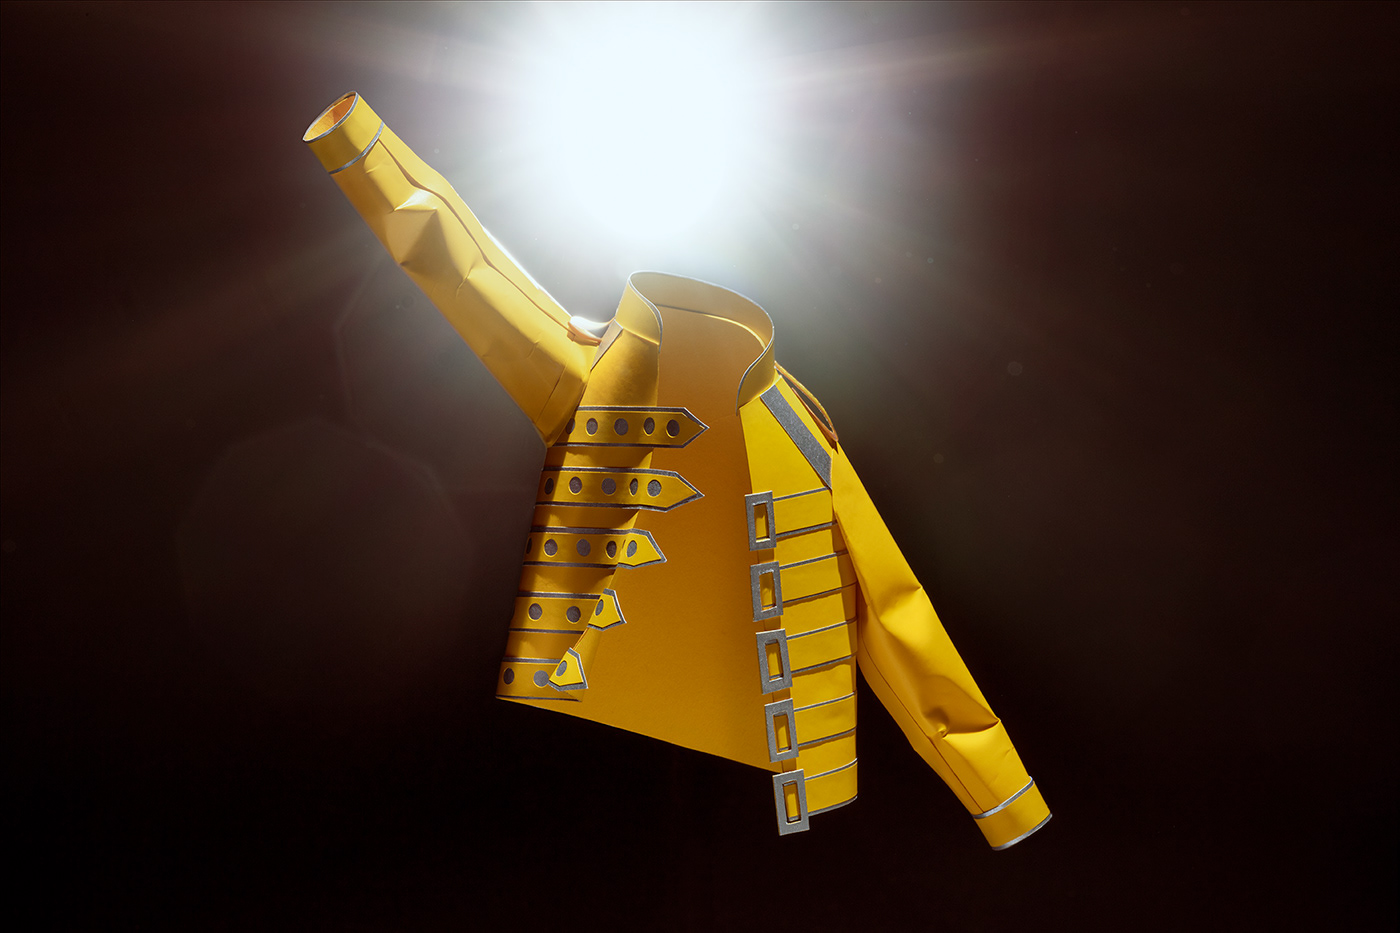 jacket yellow Freddie Mercury queen queen band bulsara Icon iconic leather jacker papercraft